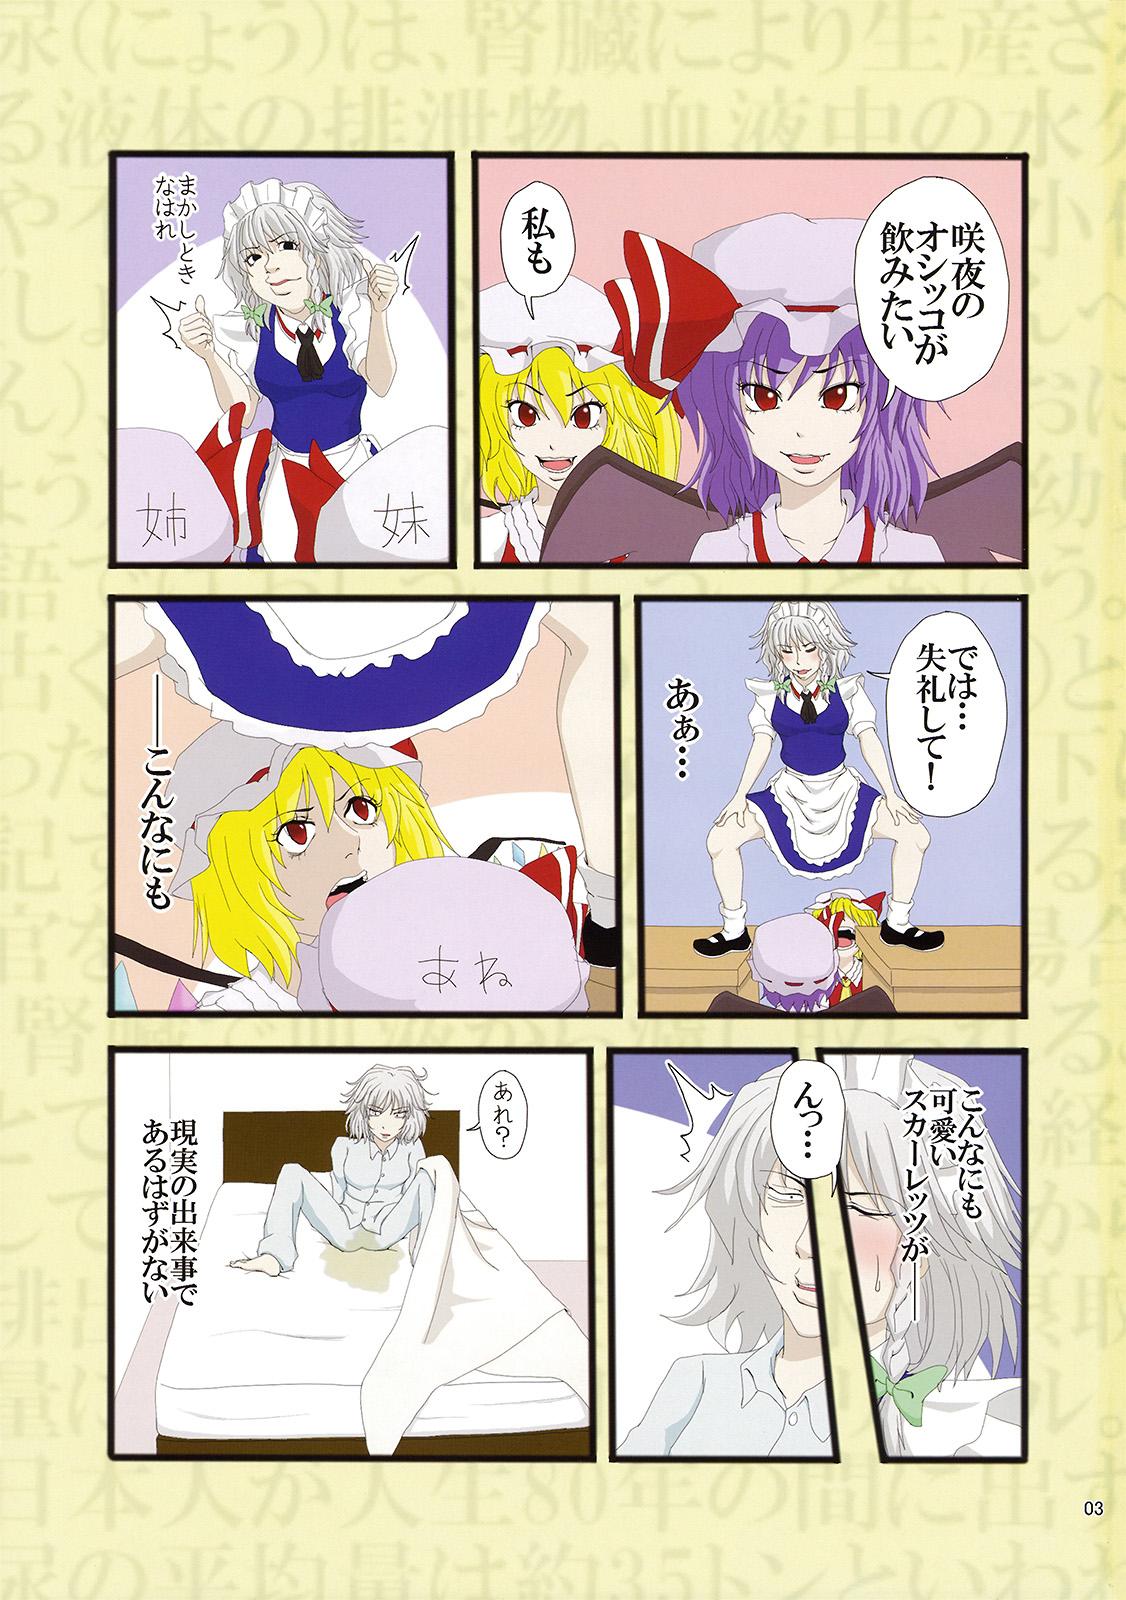 Spycam 完全で瀟洒な尿者 - Touhou project Arrecha - Page 3